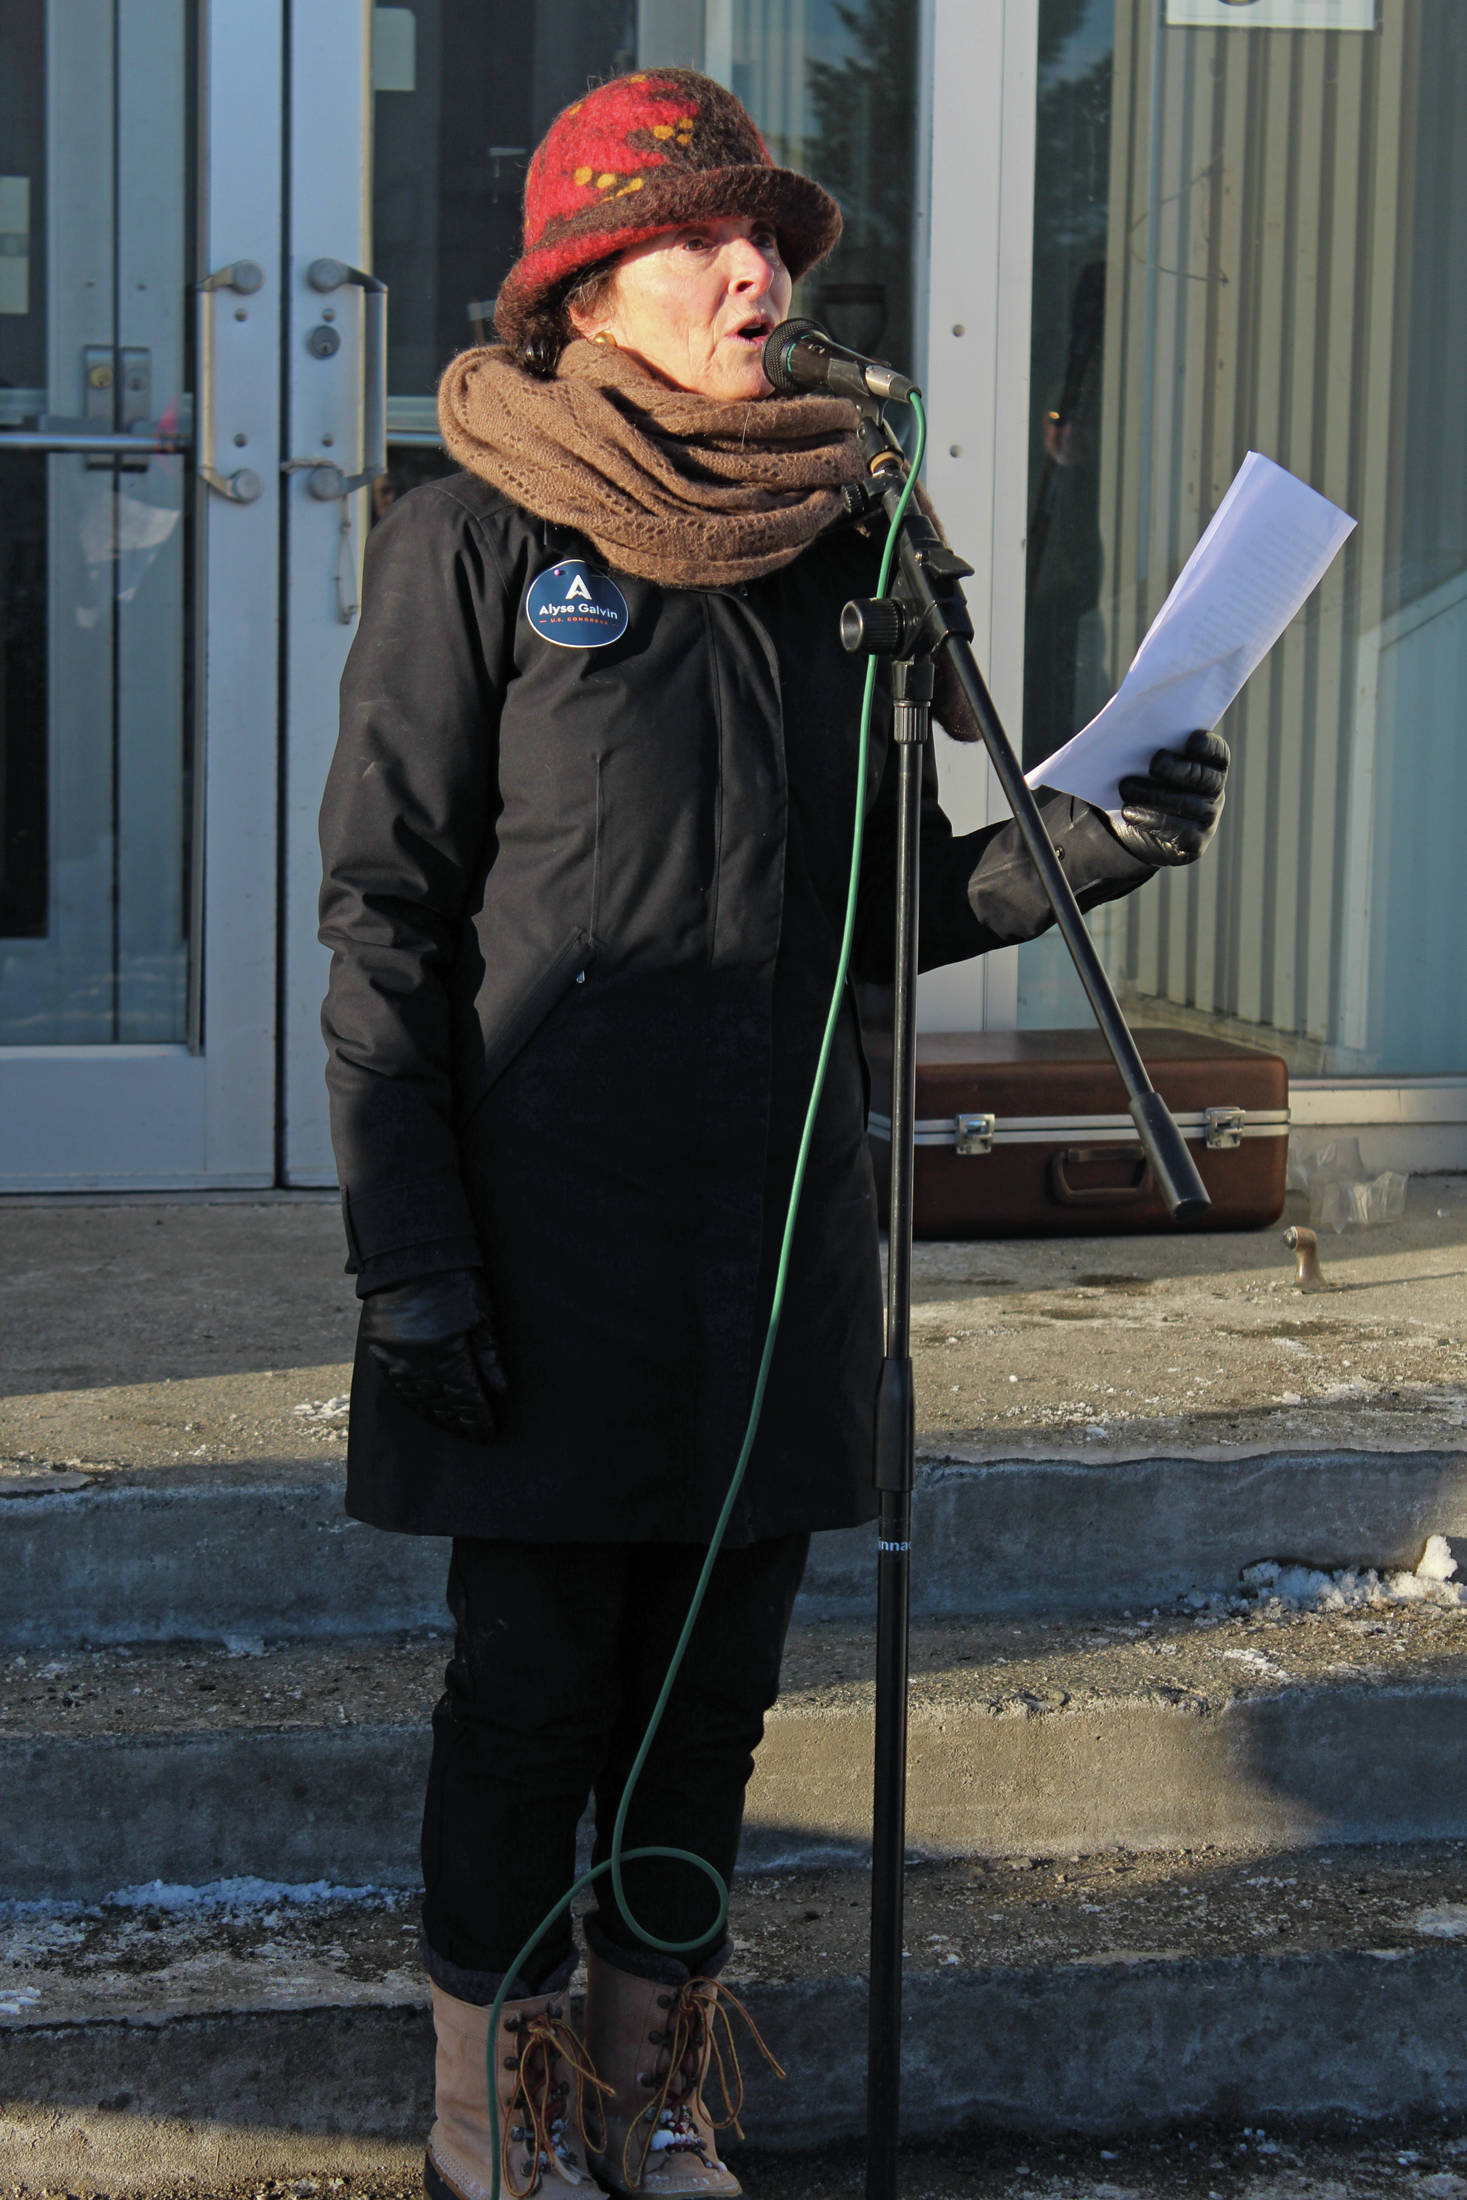 Rika Mouw speaks at this year’s Women’s March on Homer on Saturday, Jan. 18, 2020 at the Homer Education and Recreation Complex in Homer, Alaska. About 300 men, women and children marched along Pioneer Avenue to WKFL Park. (Photo by Megan Pacer/Homer News)